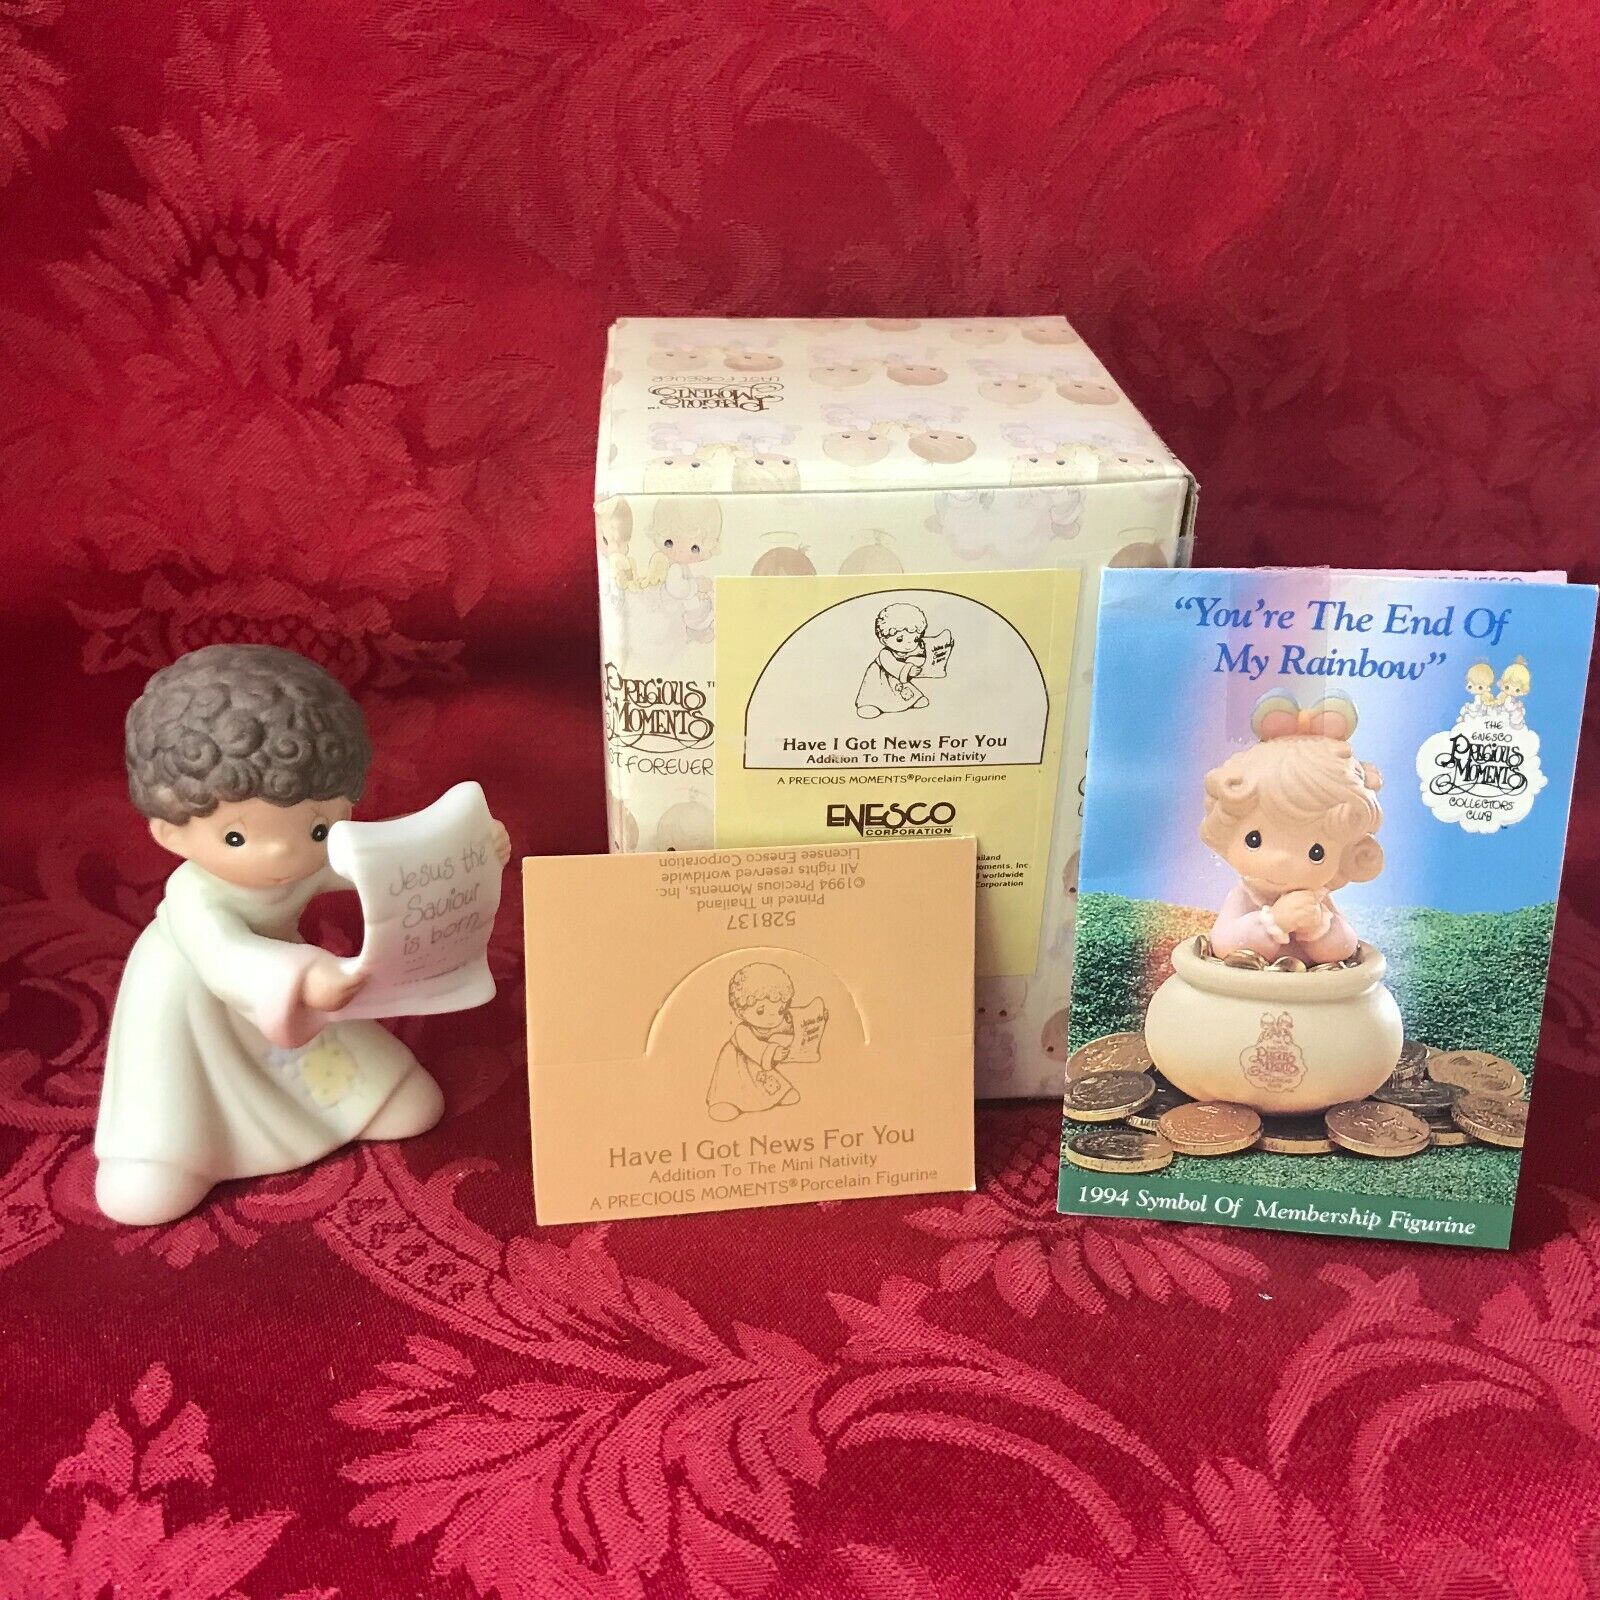 PRECIOUS MOMENTS 1994 "528137" "HAVE I GOT NEWS FOR YOU" NEW IN BOX-NEVER DISP.